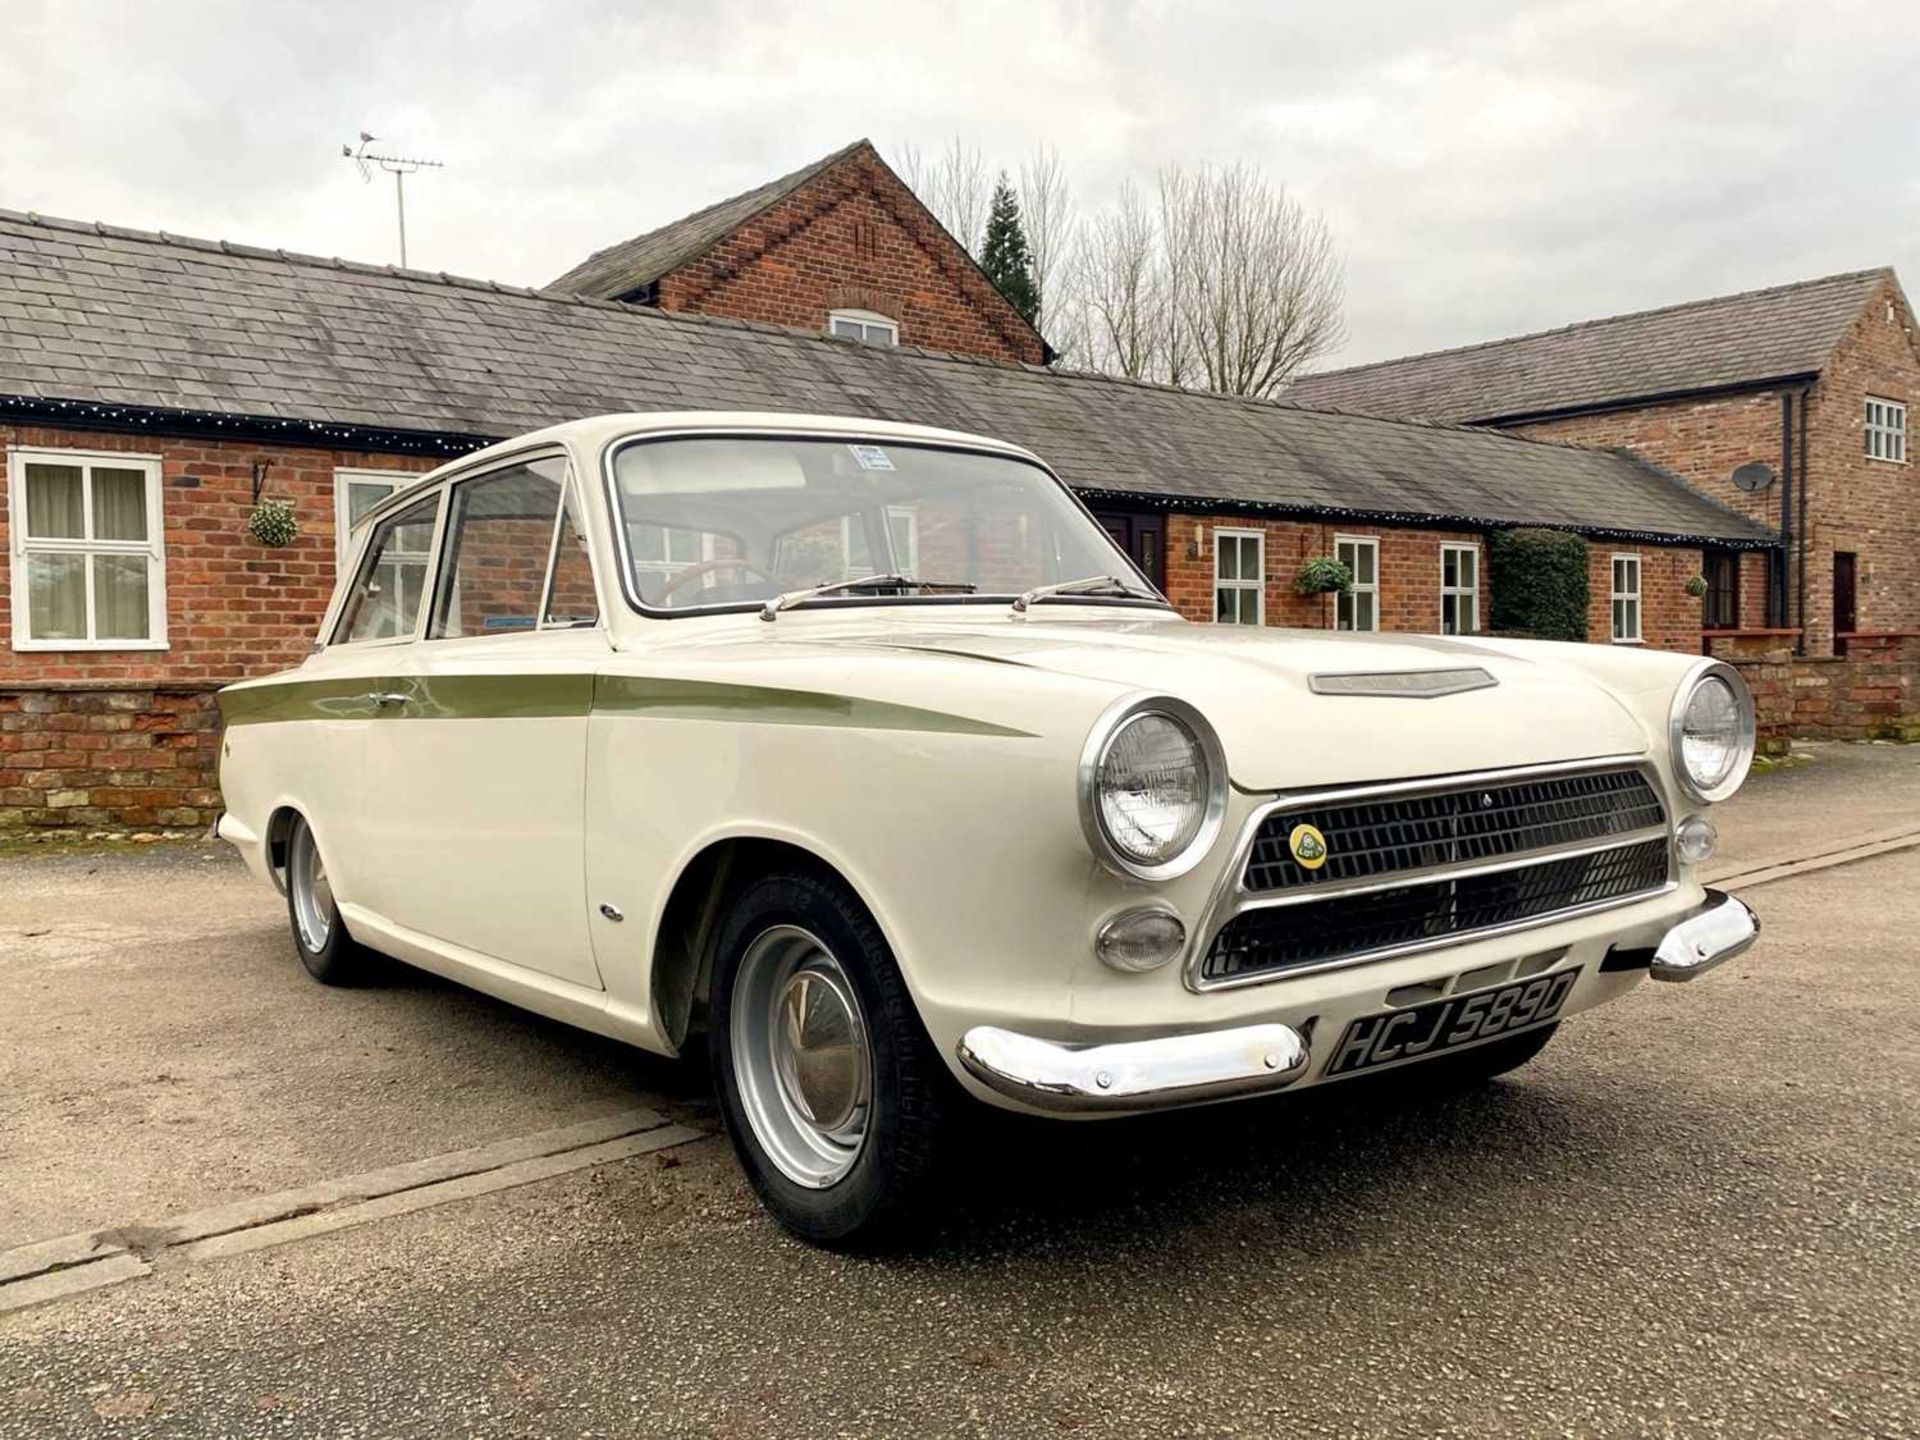 1963 Ford Lotus Cortina Pre-Aeroflow model, fitted with A-frame rear suspension - Image 7 of 58